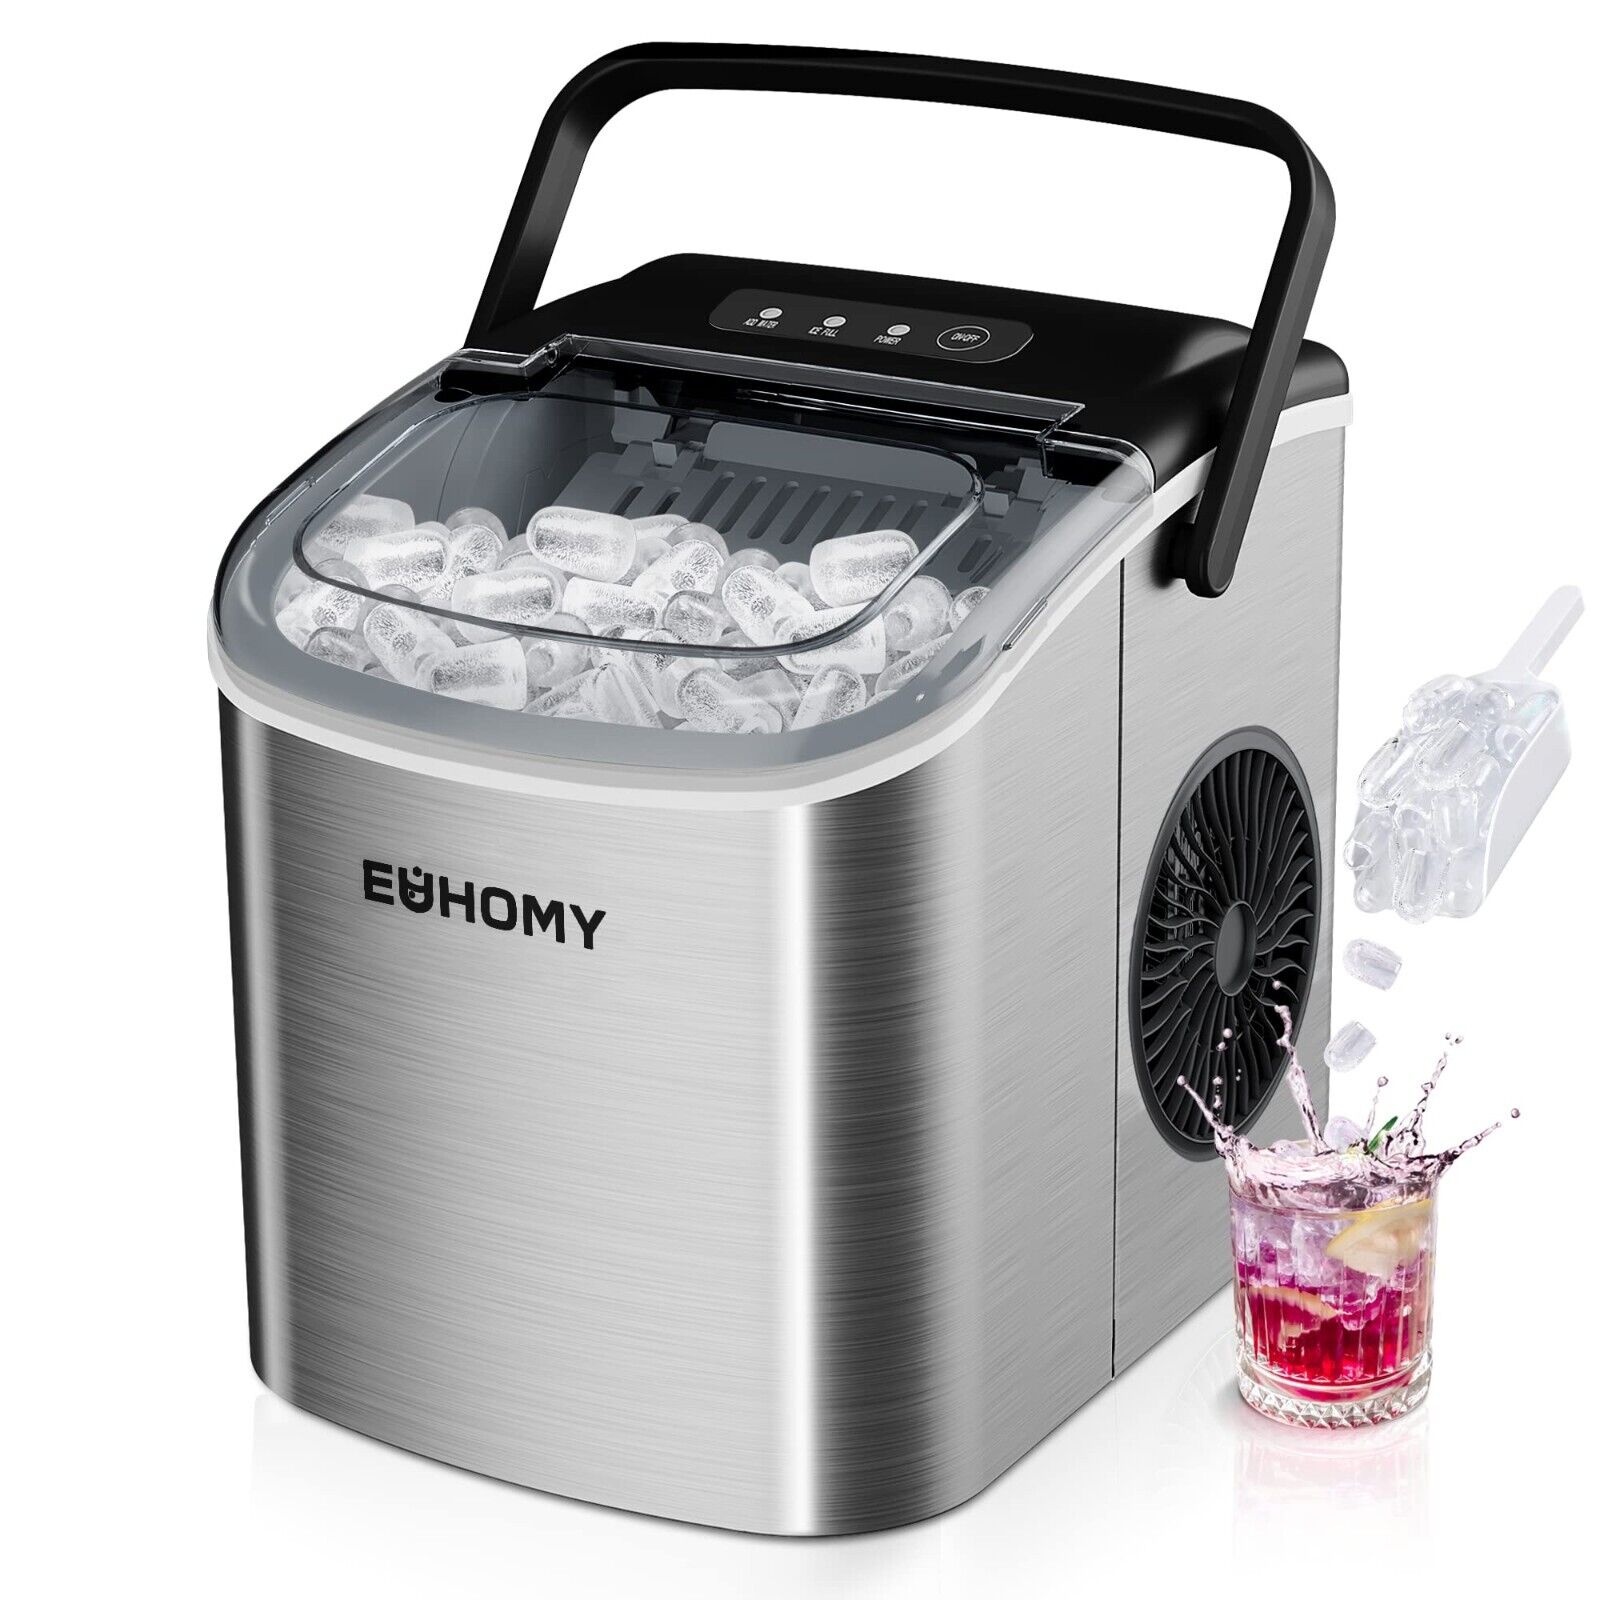 EUHOMY Countertop ice Maker Machine withHandle, 26lbs in 24Hrs, 9 lce Cubes Read